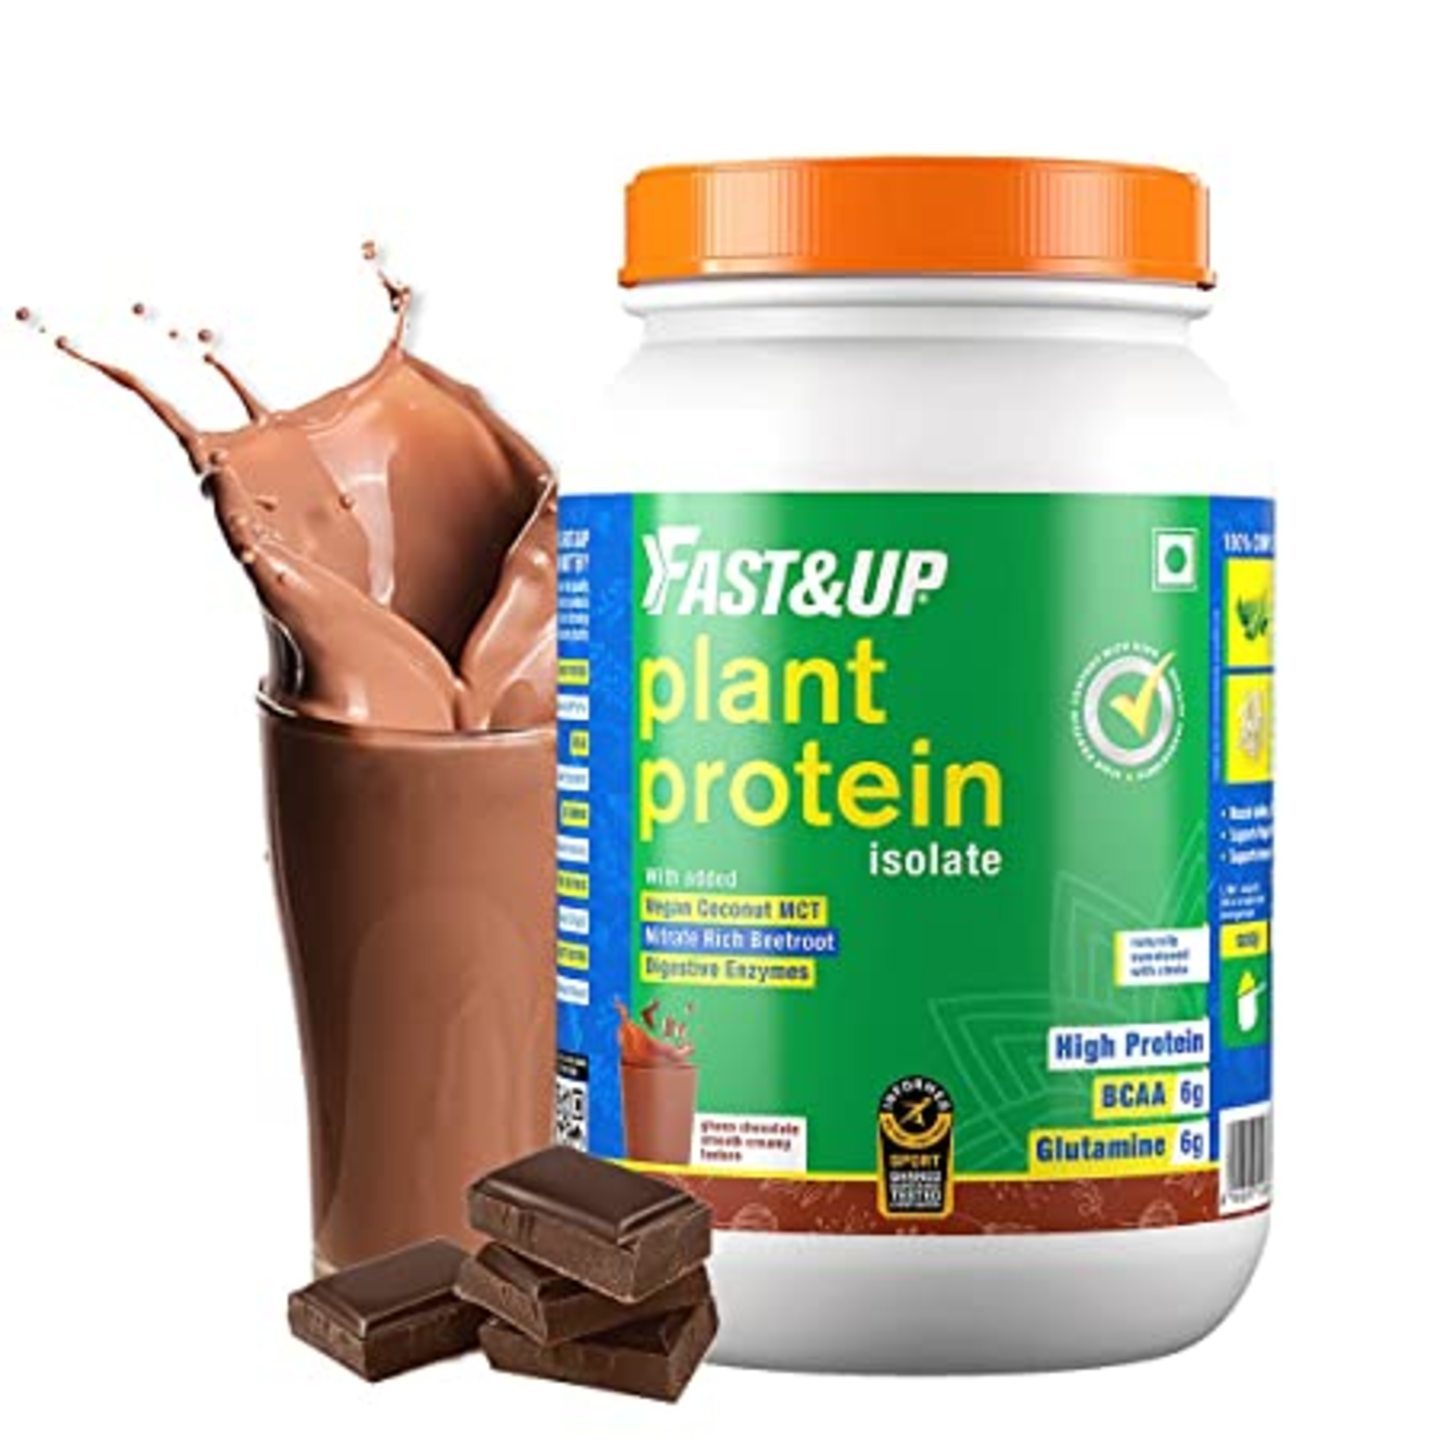 FAST & UP, PLANT PROTEIN ISOLATE